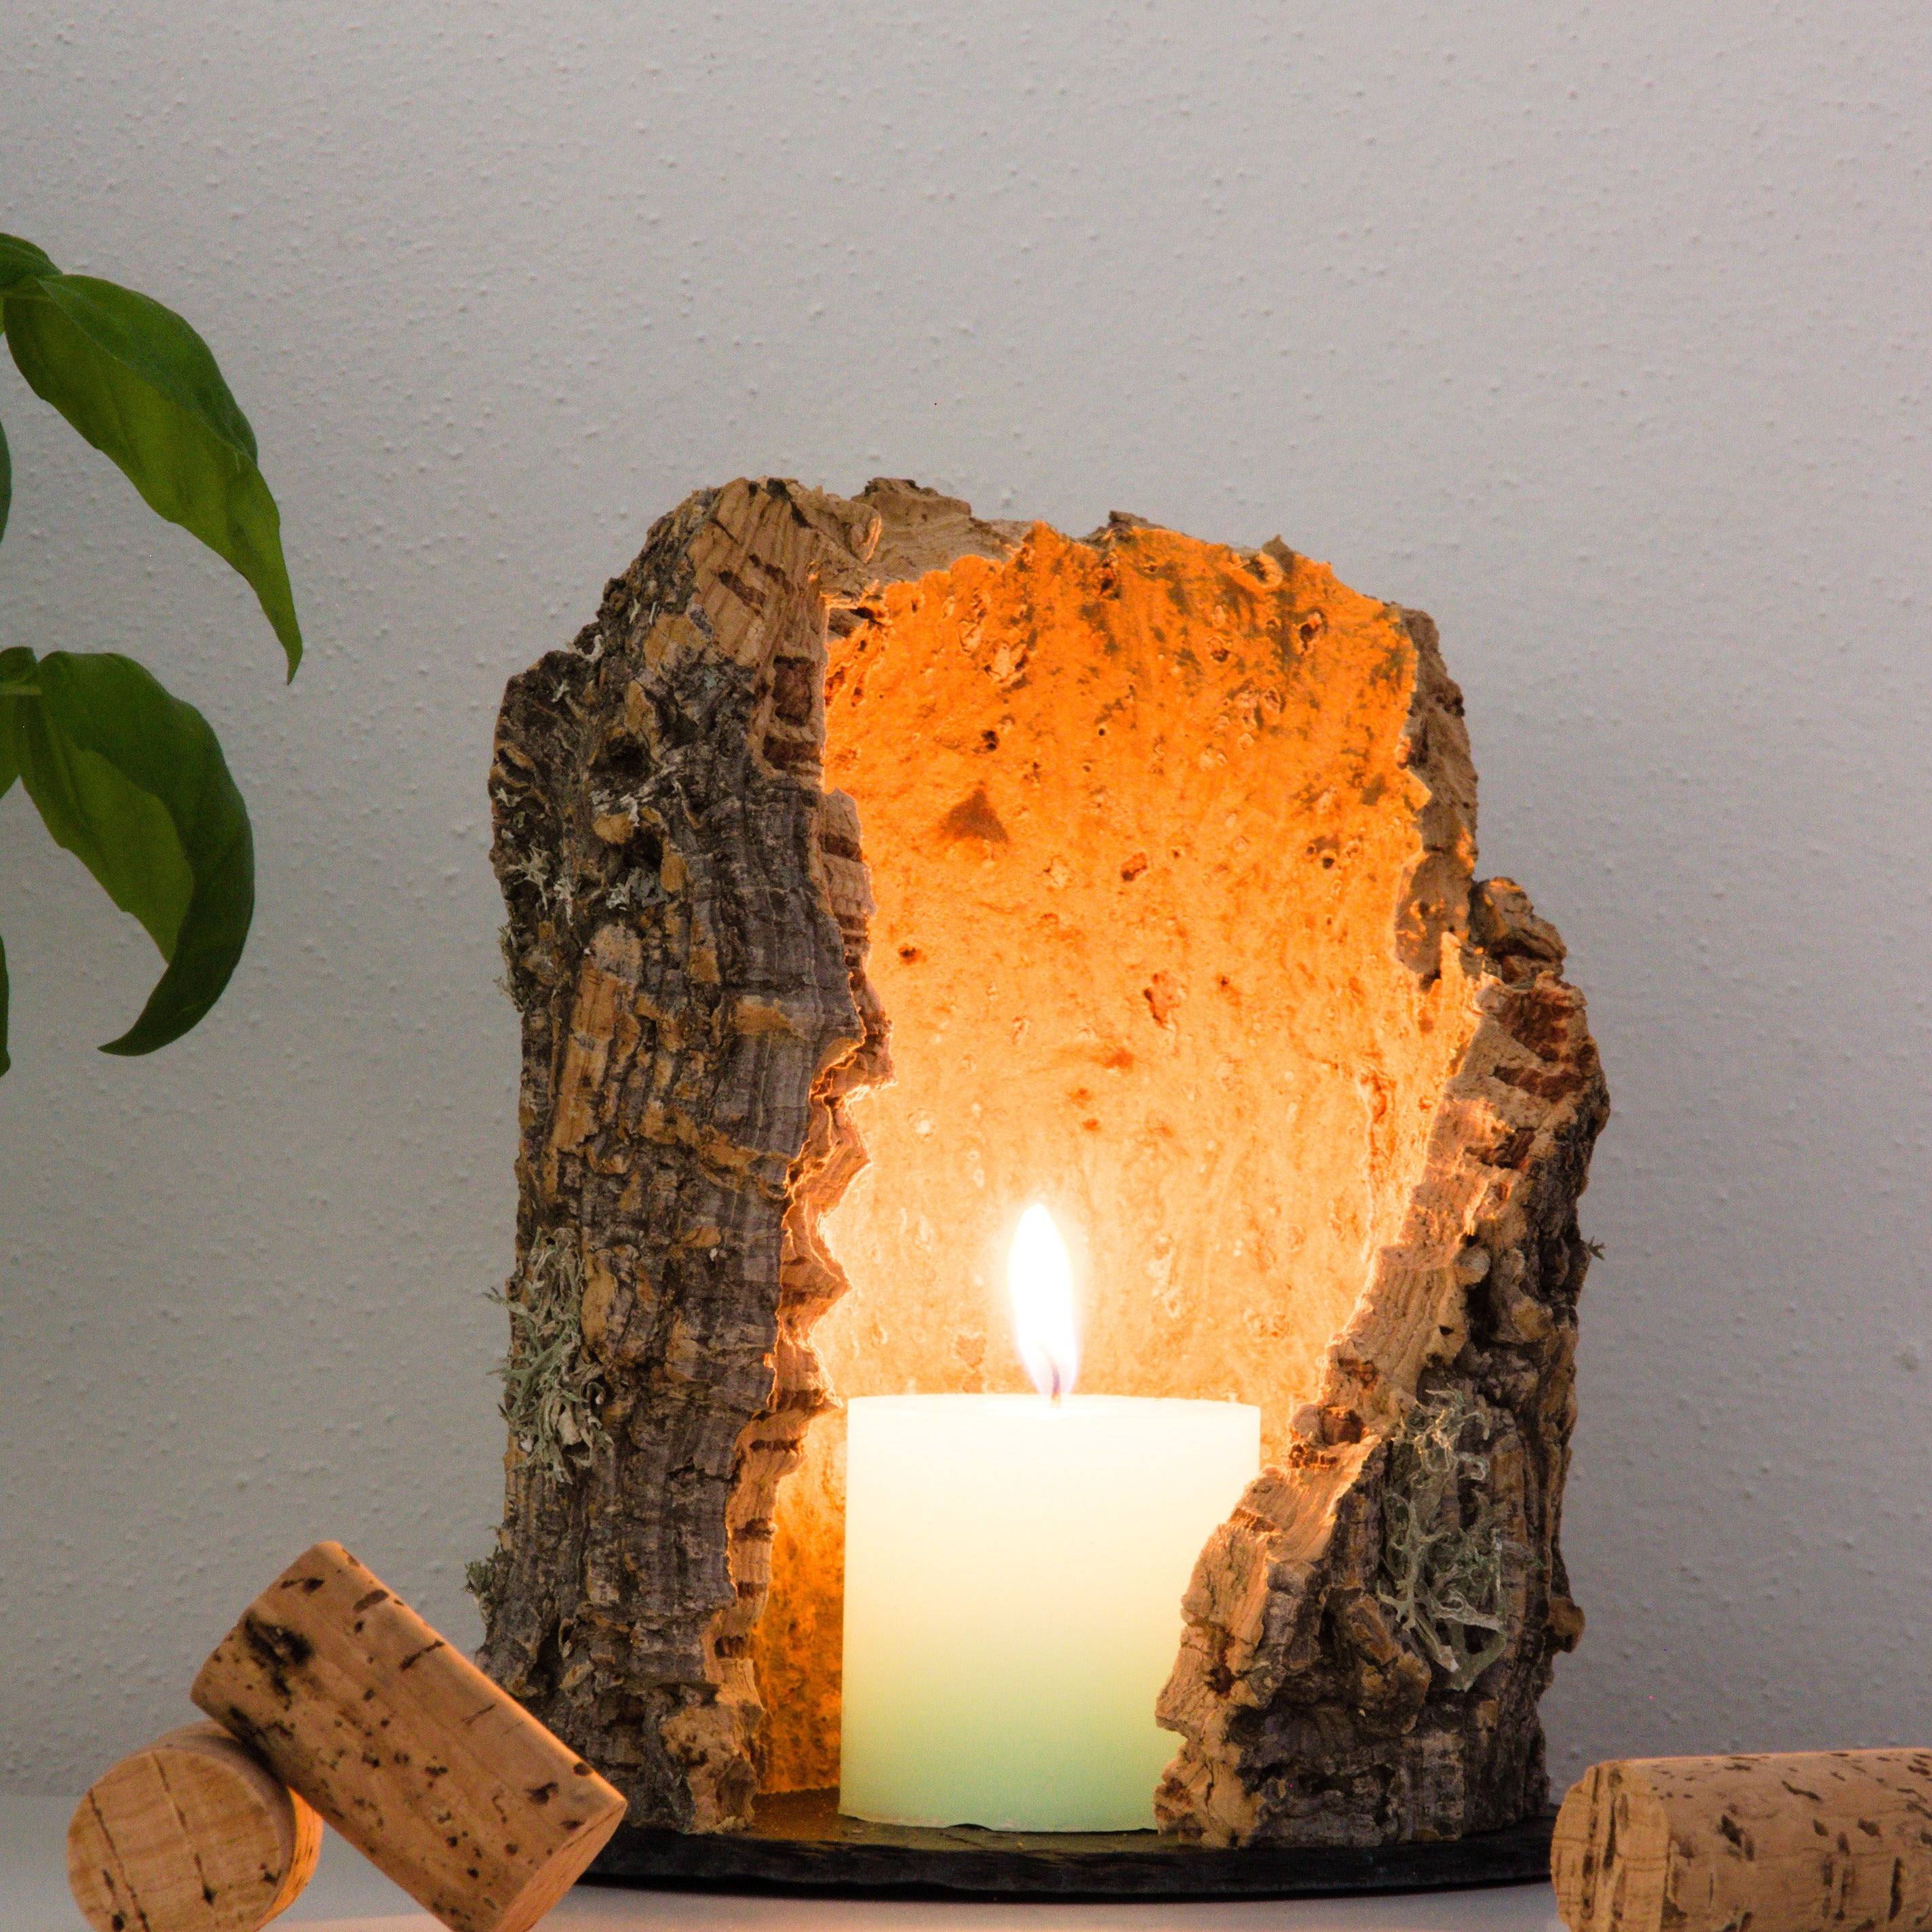 TOP gift idea * verKORKst premium baby lantern made of cork * SPECIAL OFFER from EUR 37.00* unique * fireproof, water-repellent, handmade, sustainable